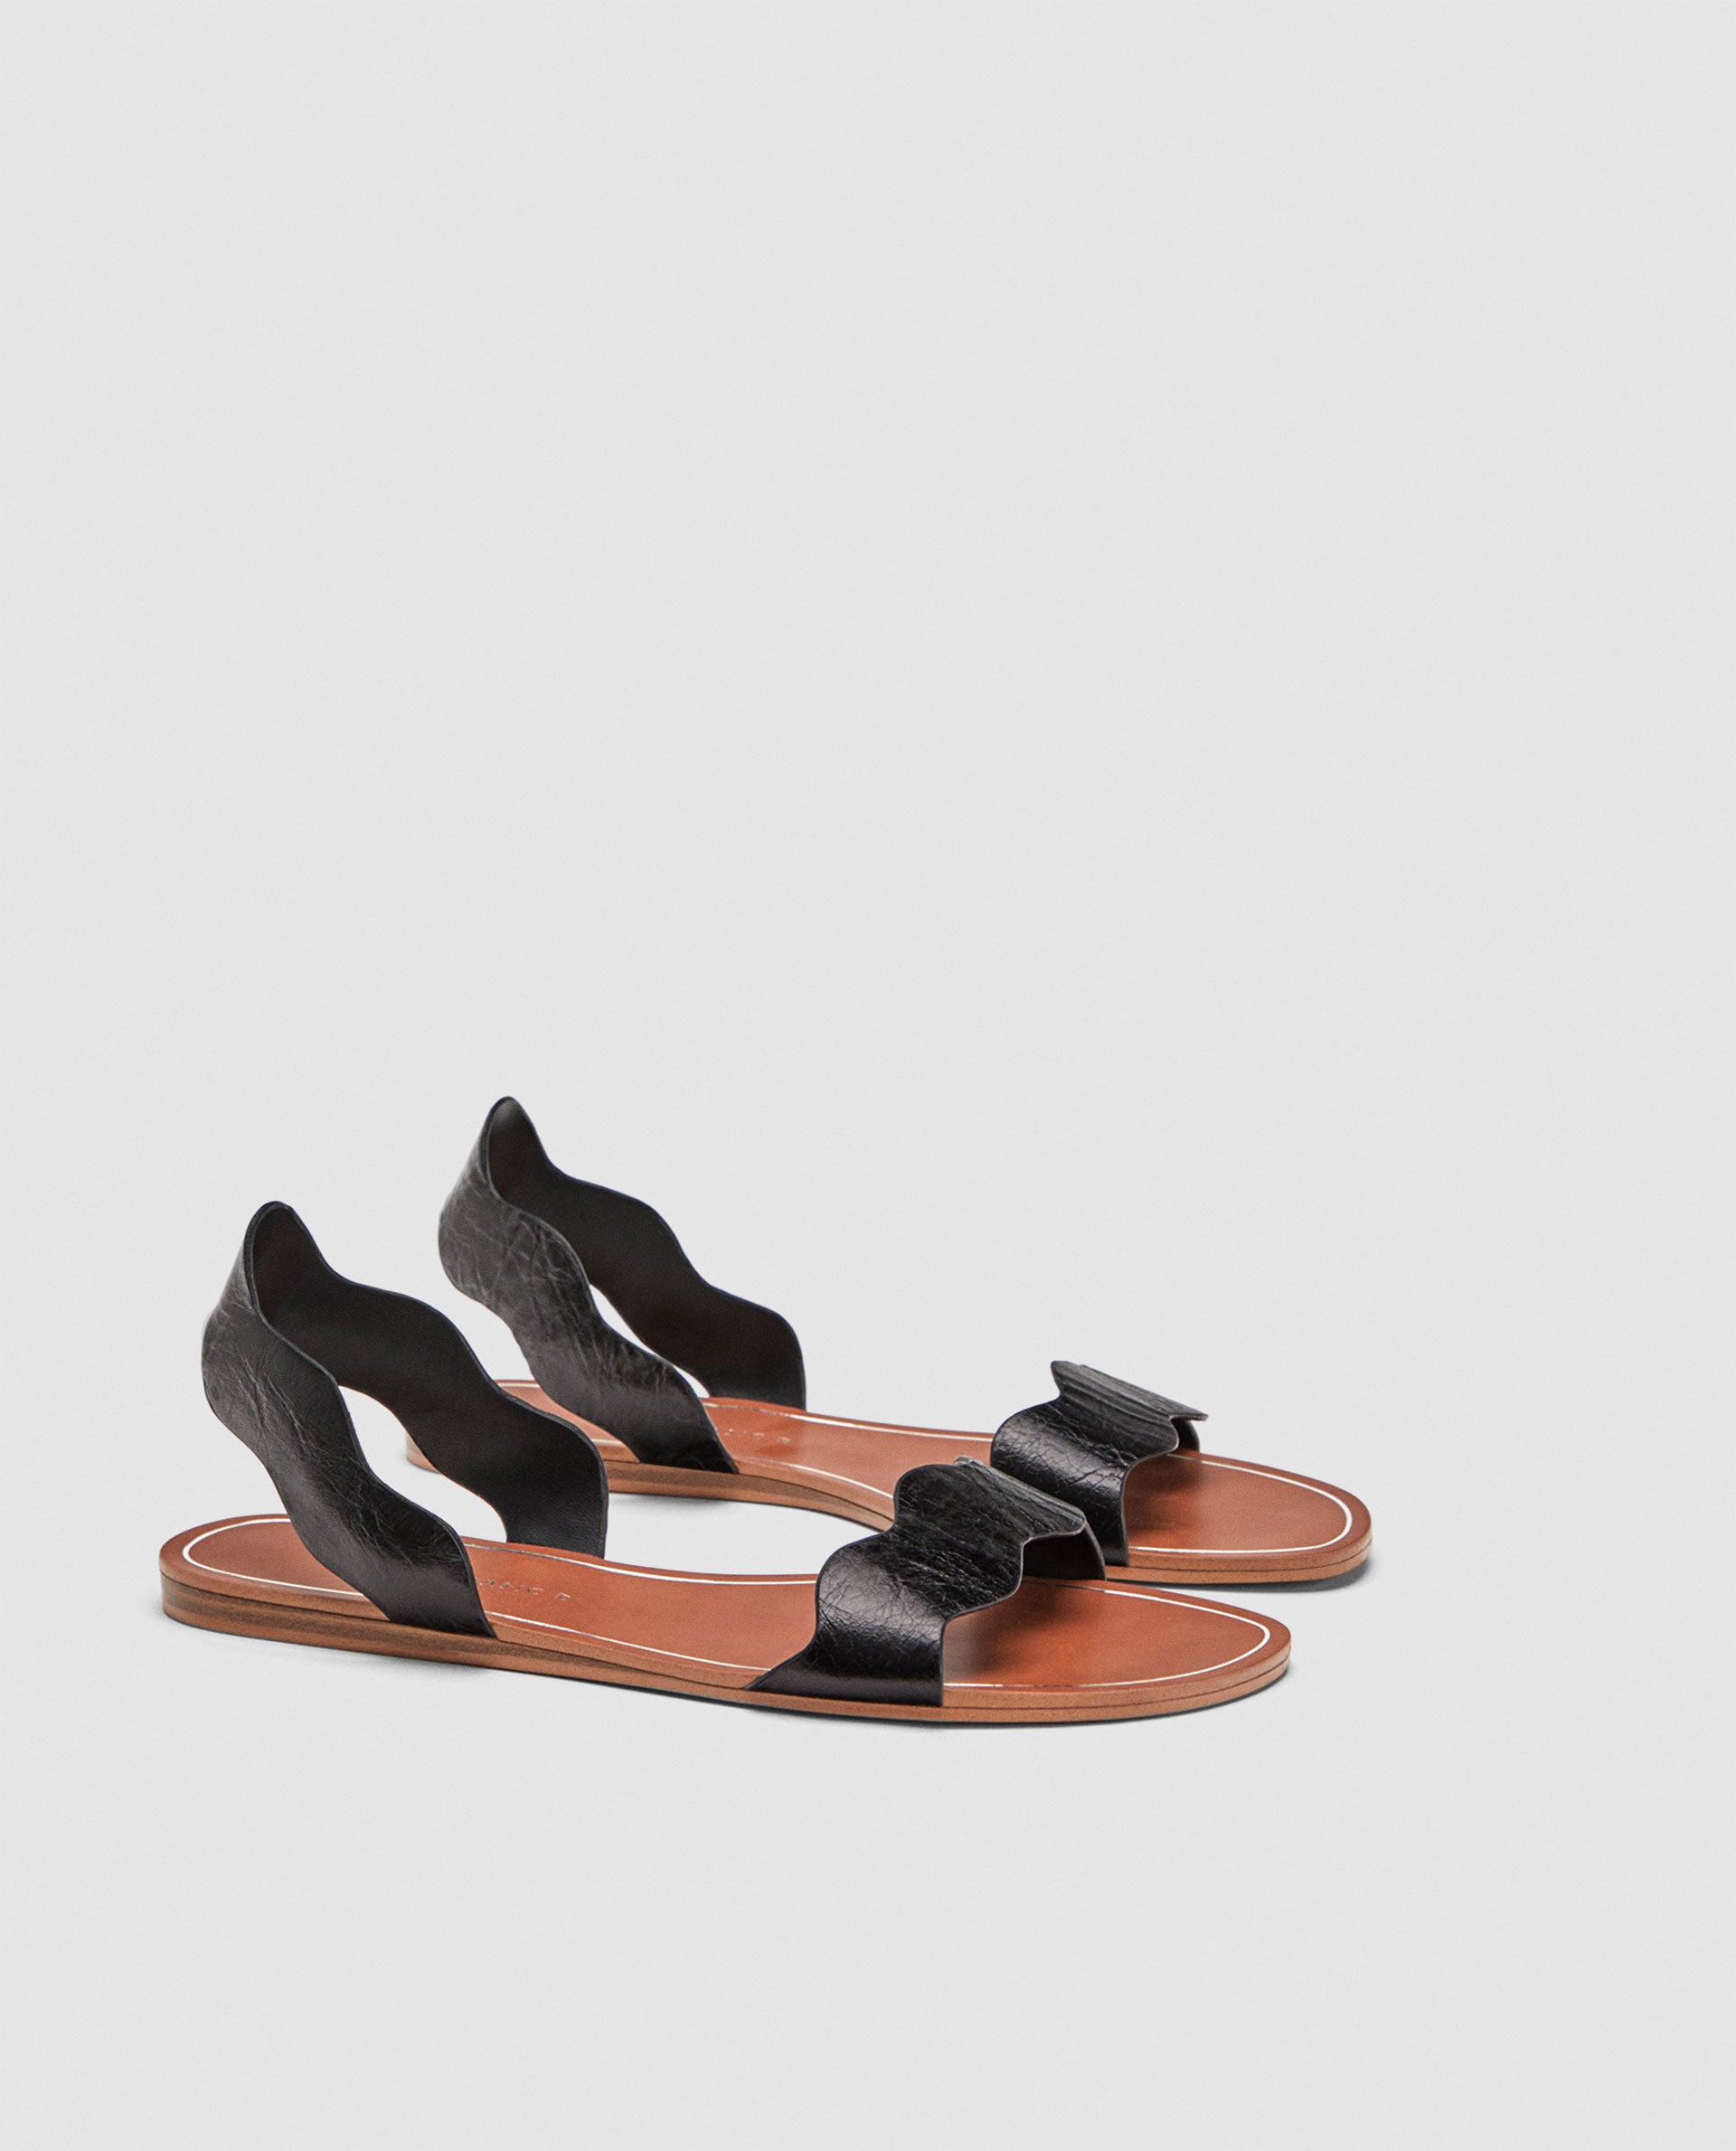 Fancy Feet! Make Your Toes Happy With these 15 Summer Sandals Under $50 
